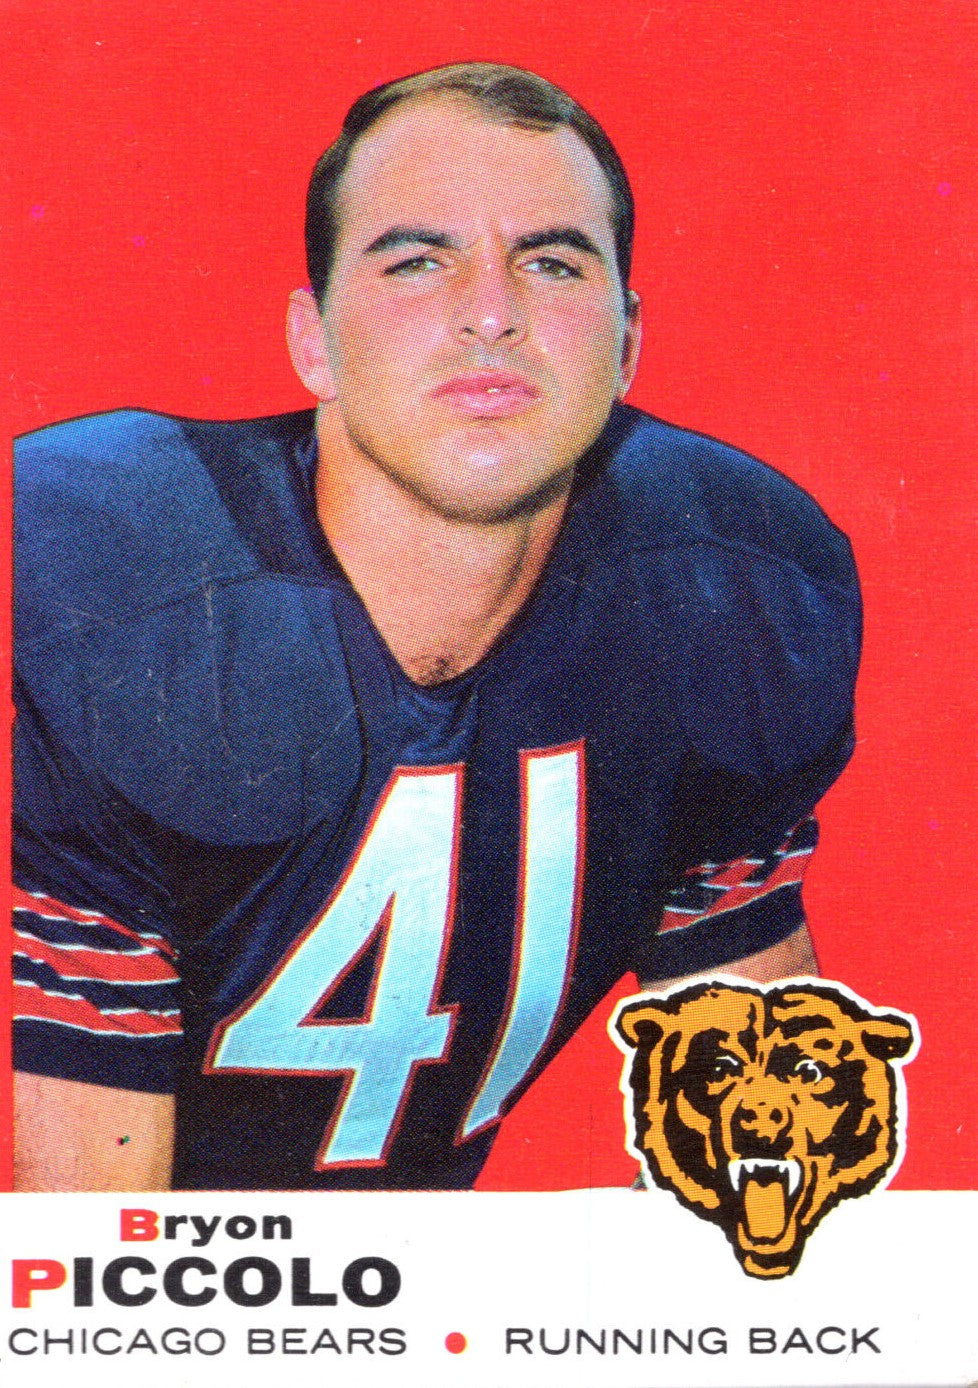 1969 Topps #26 Bryan Piccolo rookie Reprint card Chicago Bears  **